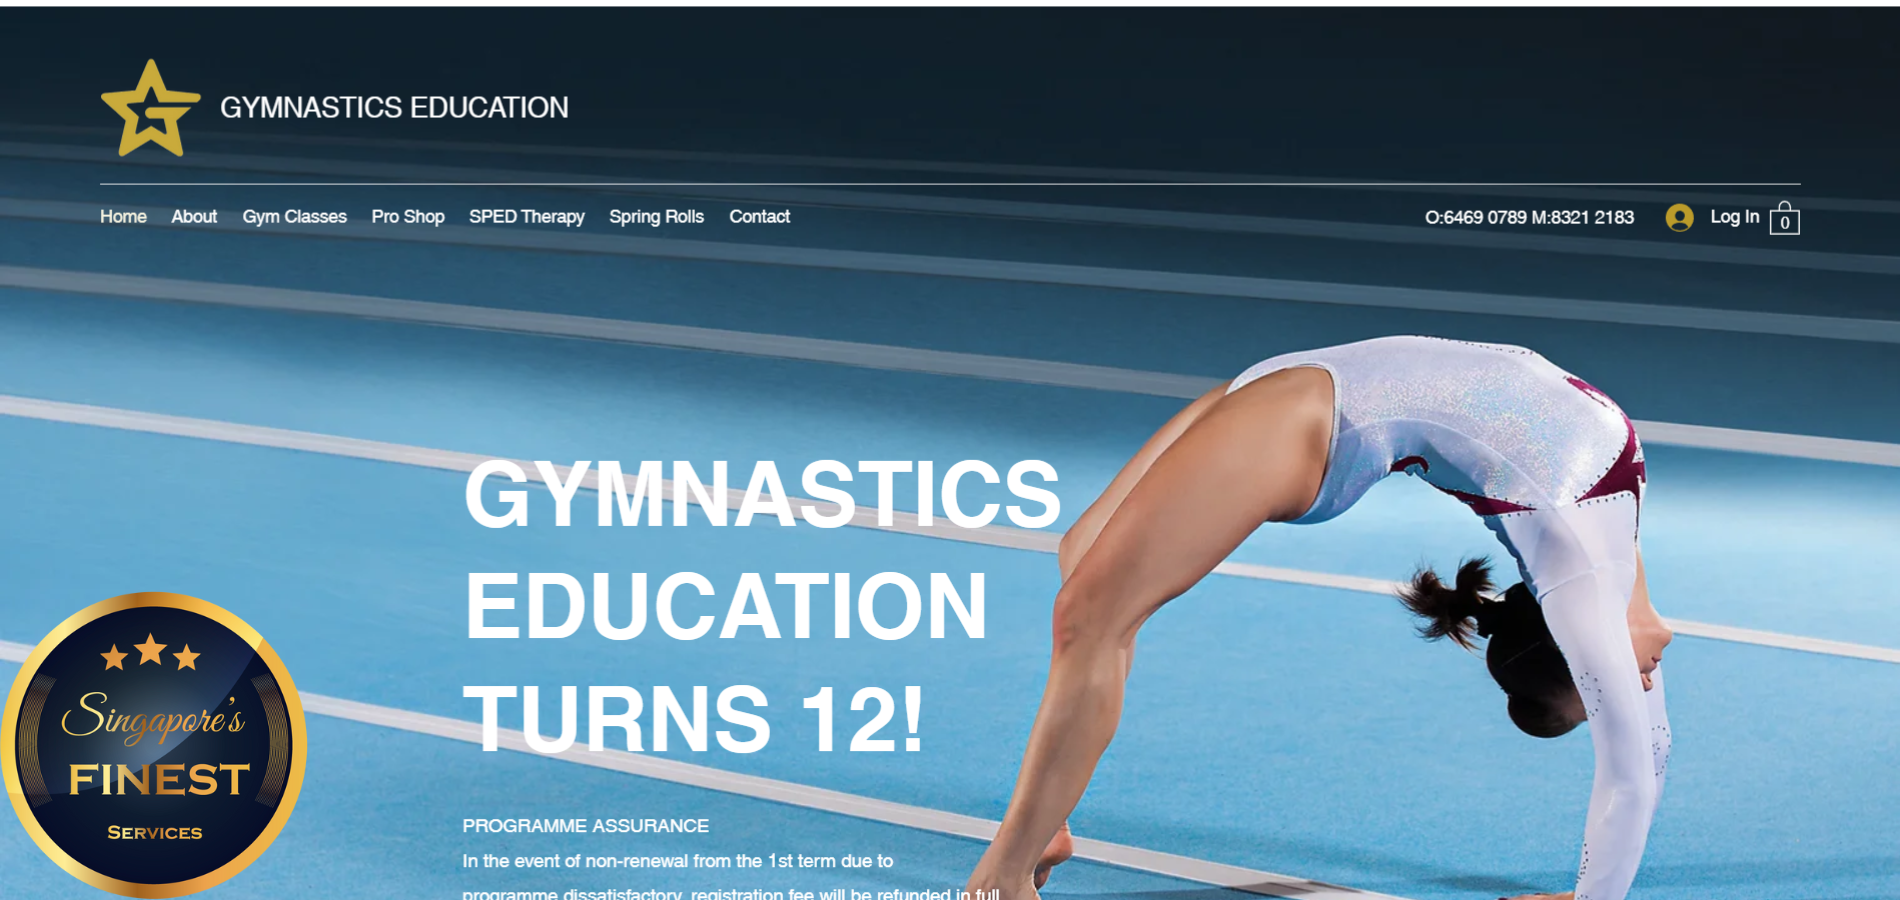 The Finest Gymnastics Classes For Kids in Singapore